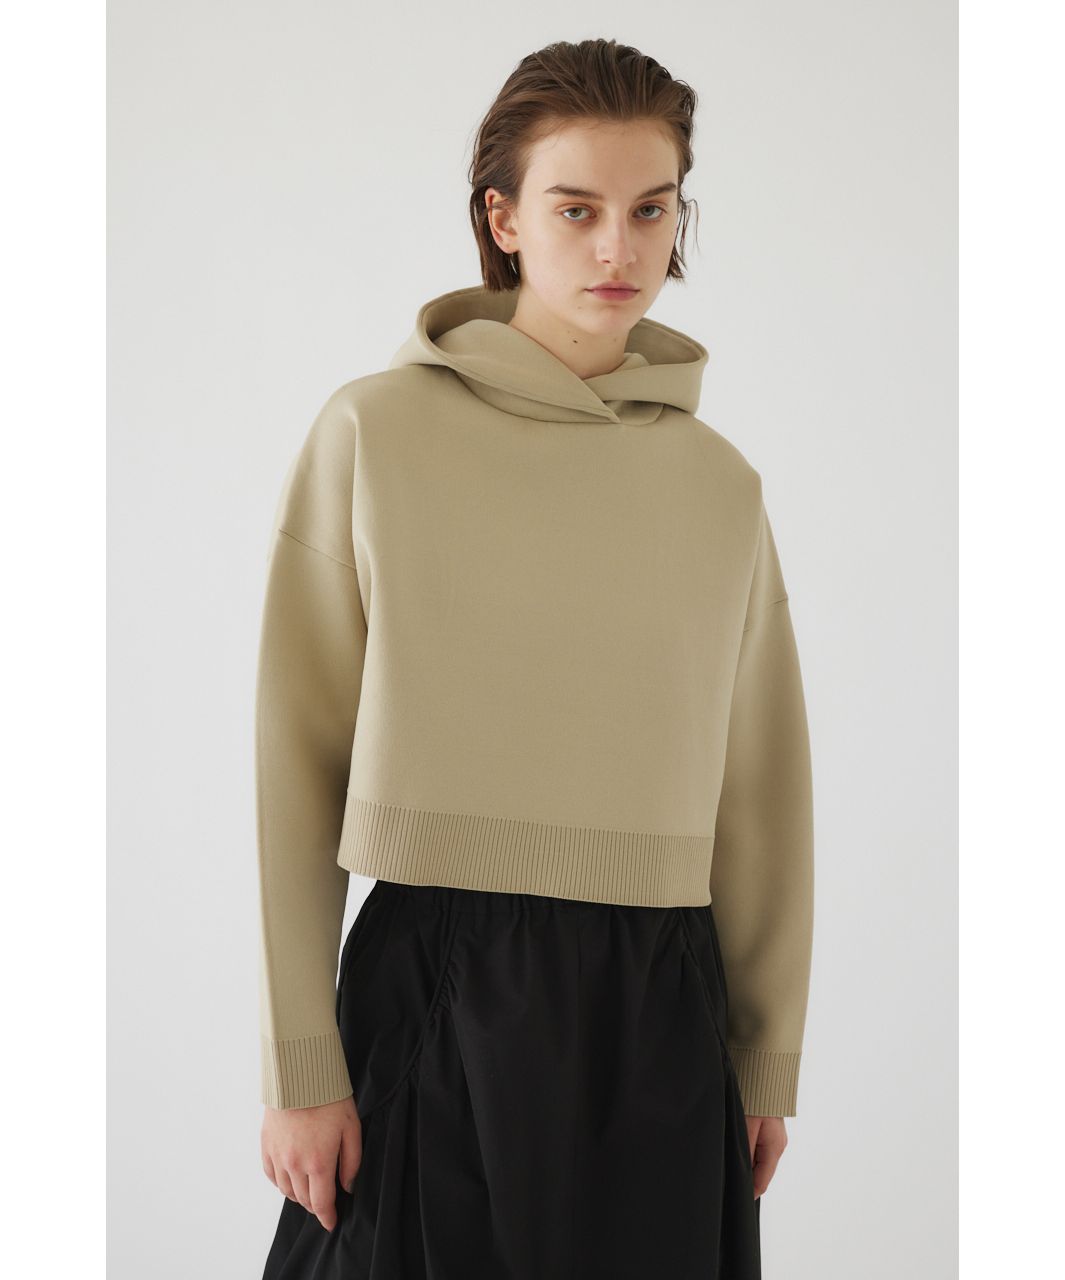 Oversized hoodie knit